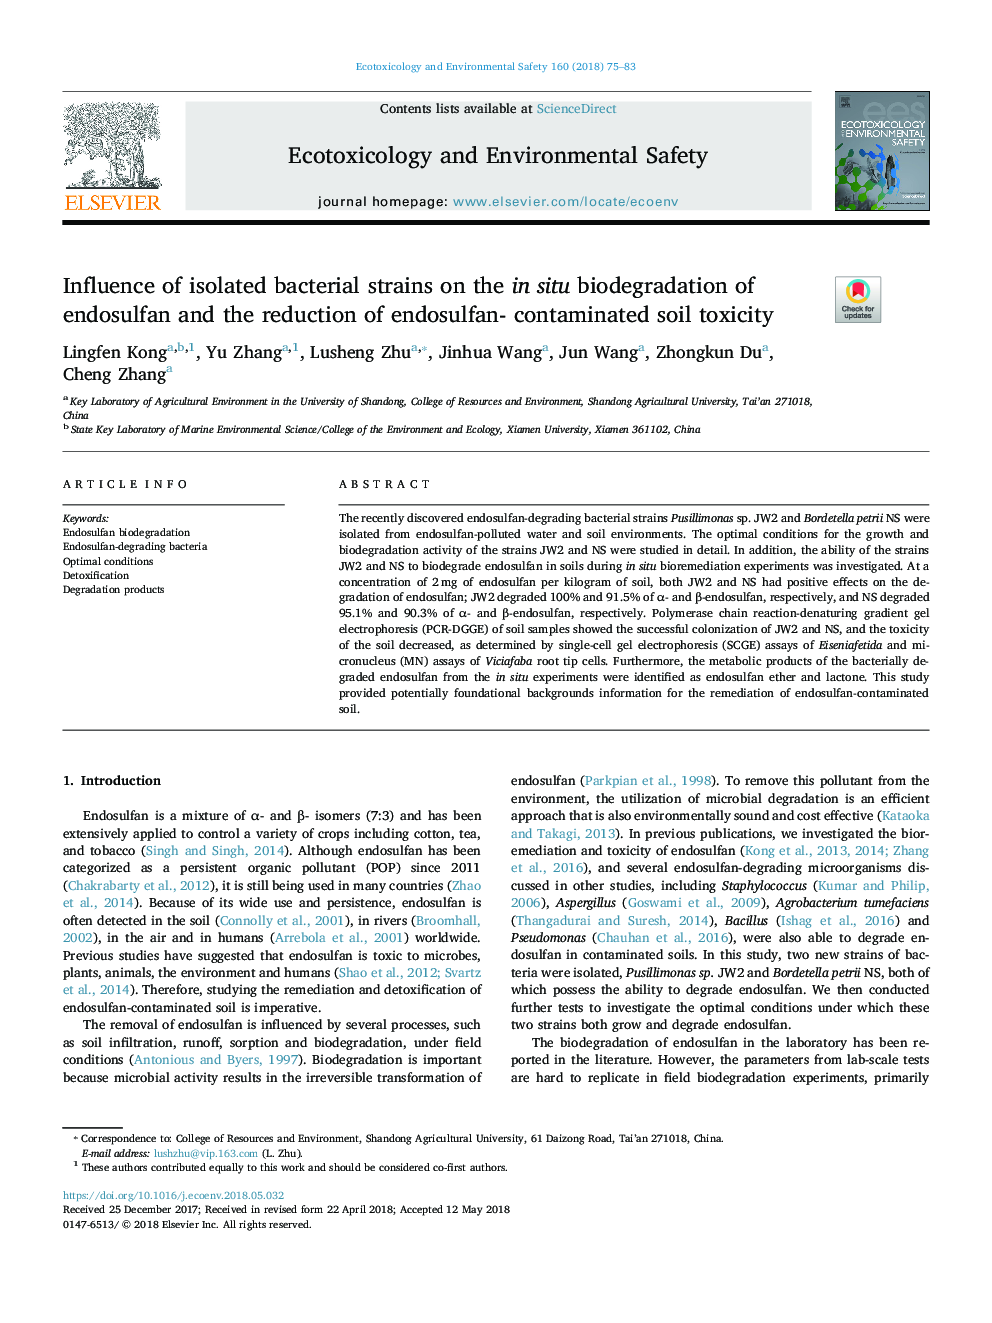 Influence of isolated bacterial strains on the in situ biodegradation of endosulfan and the reduction of endosulfan- contaminated soil toxicity